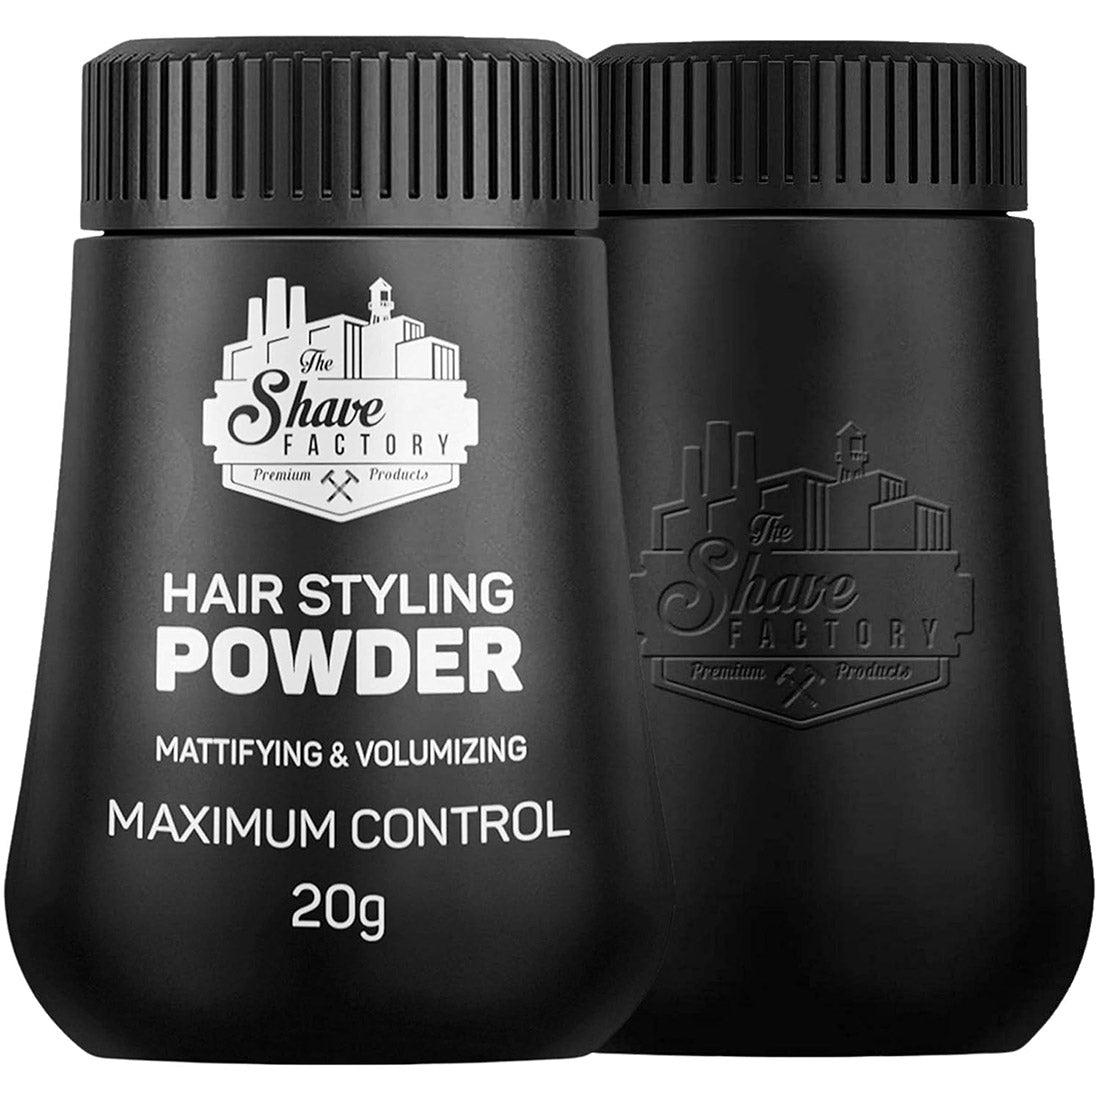 The Shave Factory Hair Styling Powder